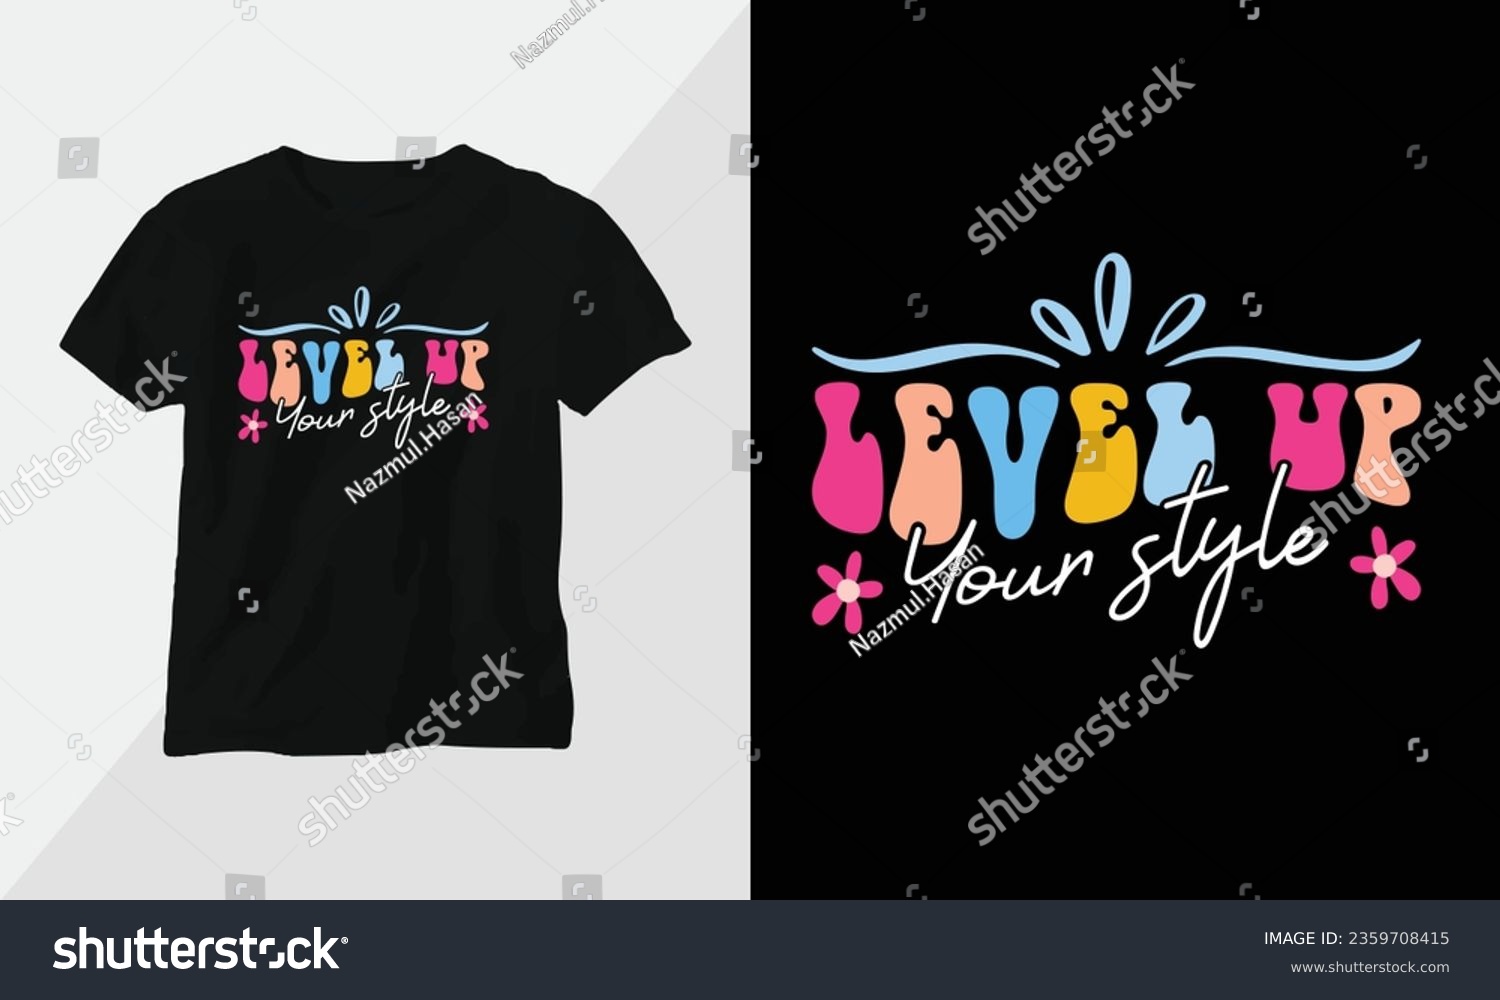 SVG of Level up your style - Retro Groovy Inspirational T-shirt Design with retro style svg